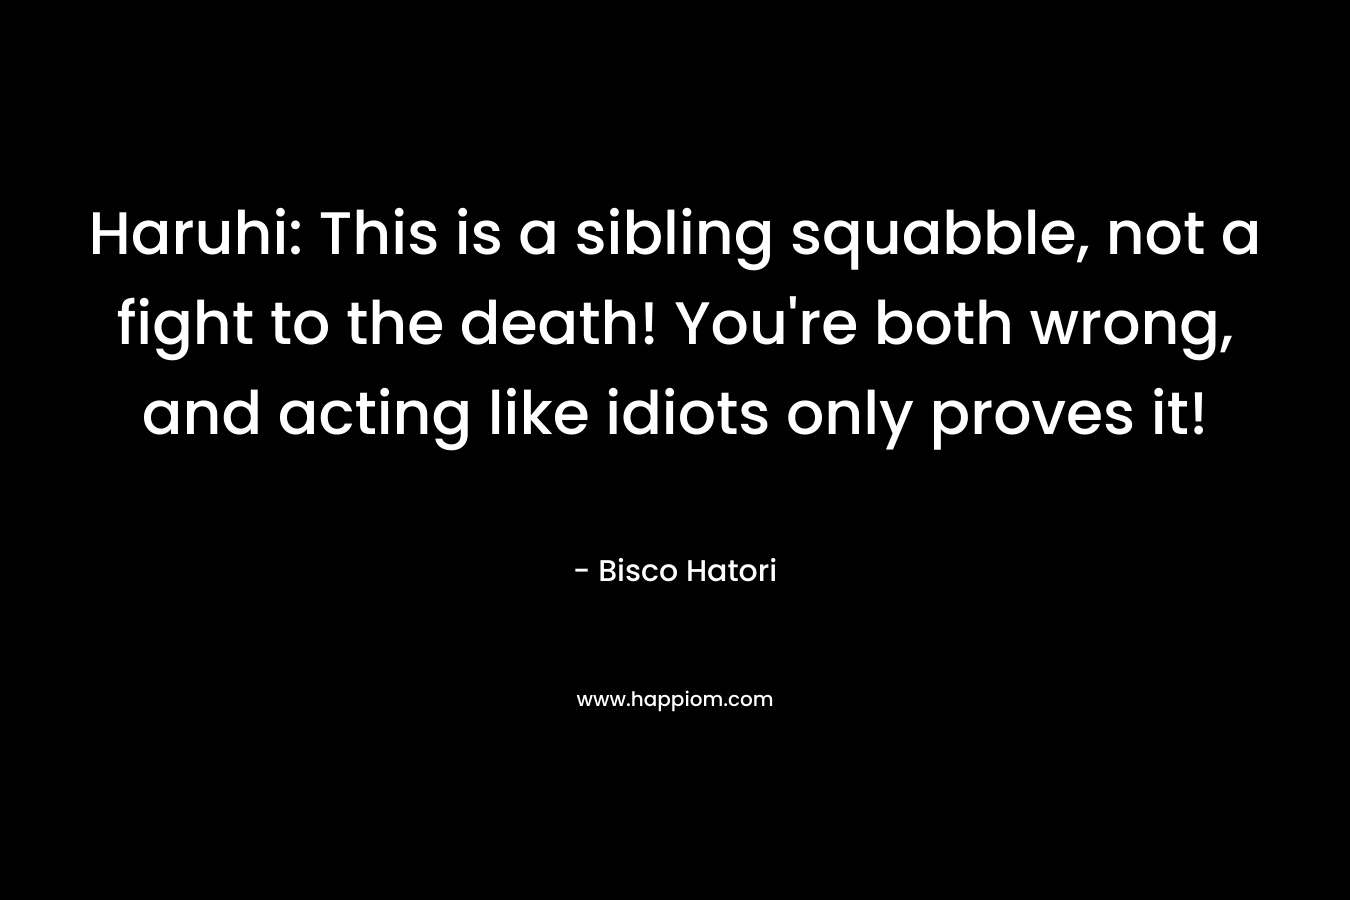 Haruhi: This is a sibling squabble, not a fight to the death! You’re both wrong, and acting like idiots only proves it! – Bisco Hatori